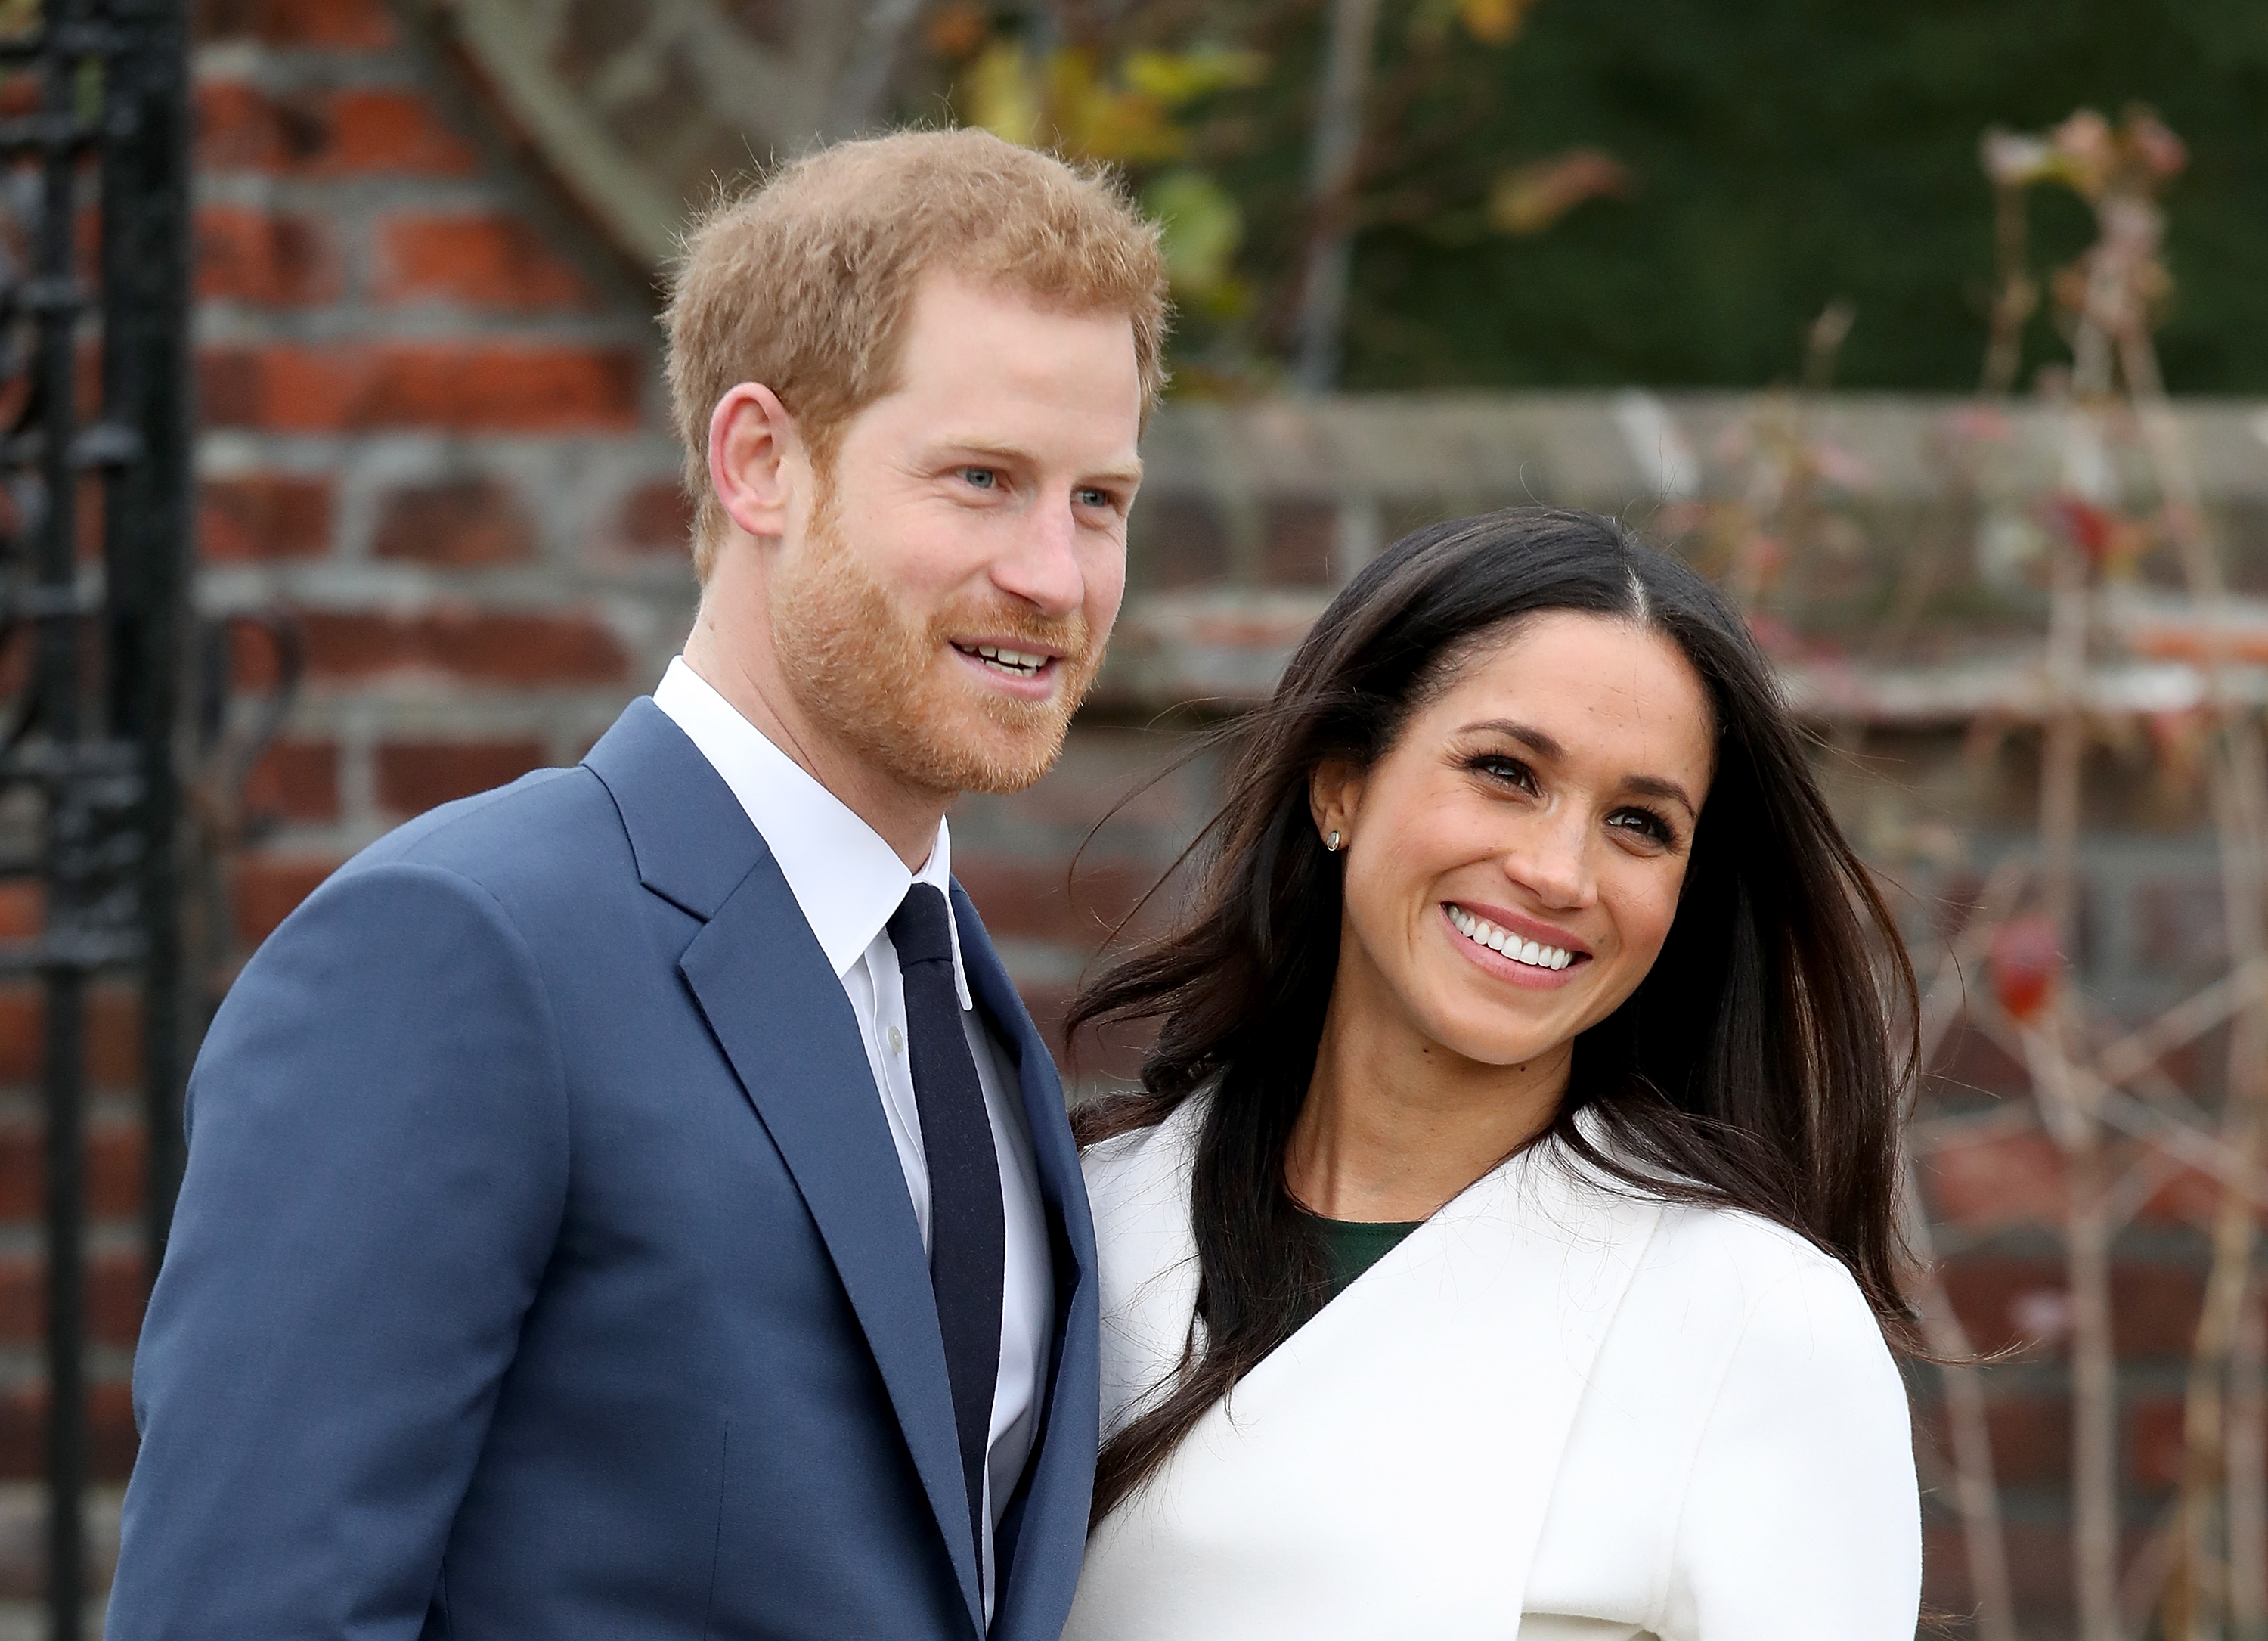 Prince Harry and Meghan Markle announce their engagement at Kensington Palace on Nov. 27, 2017 in London (Chris Jackson—Getty Images)